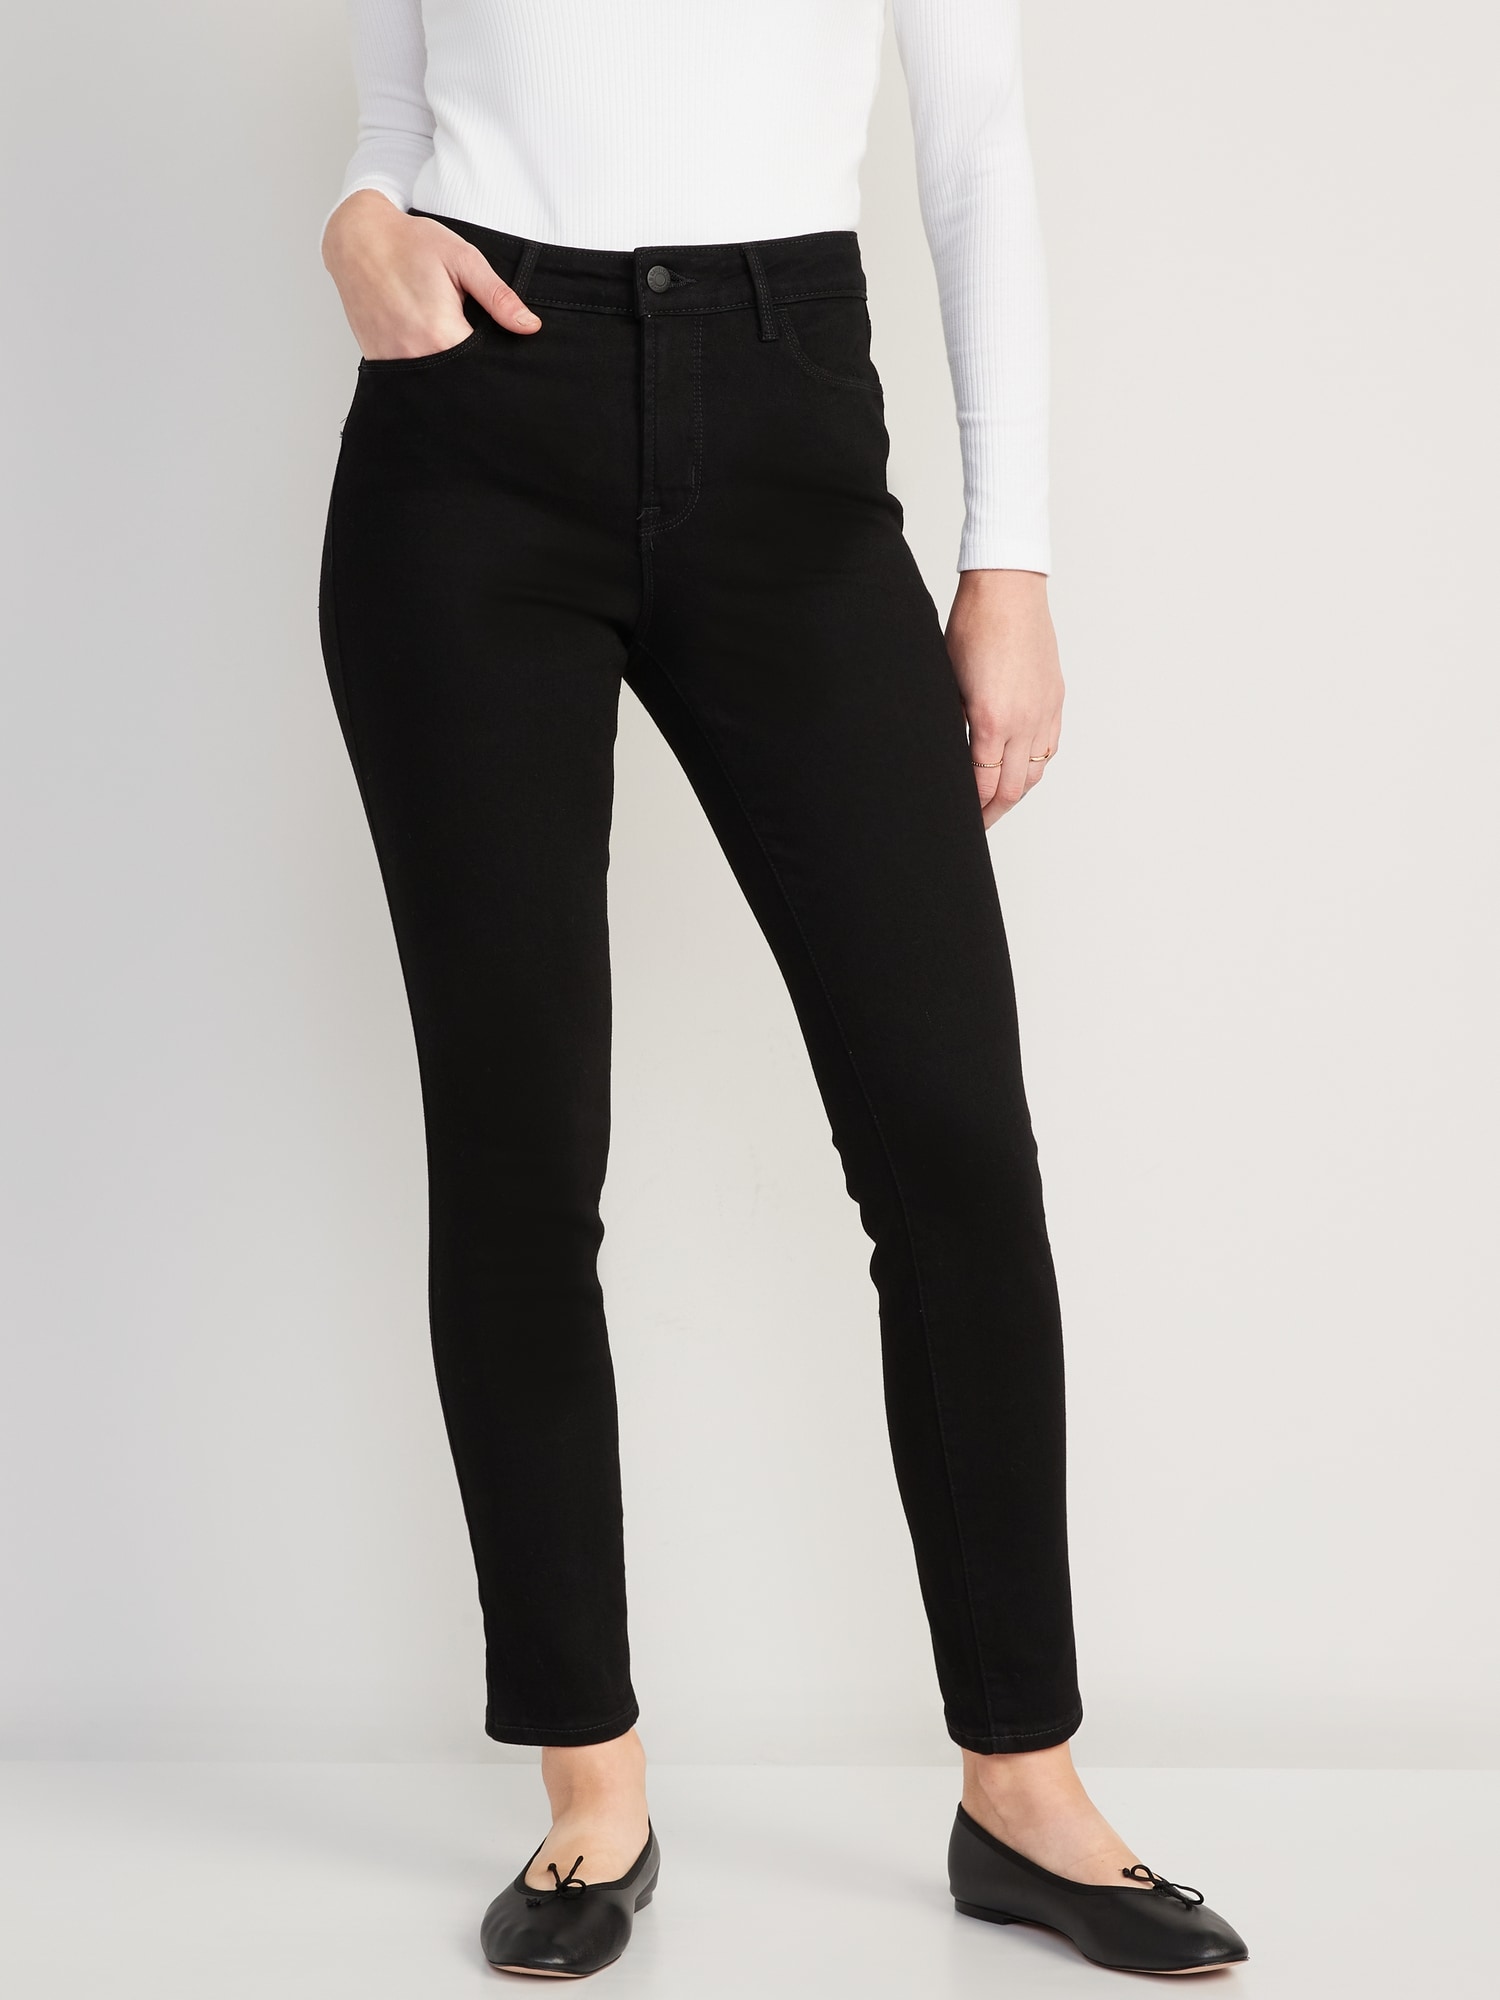 High-Waisted Power Straight Black Jeans for Women | Old Navy